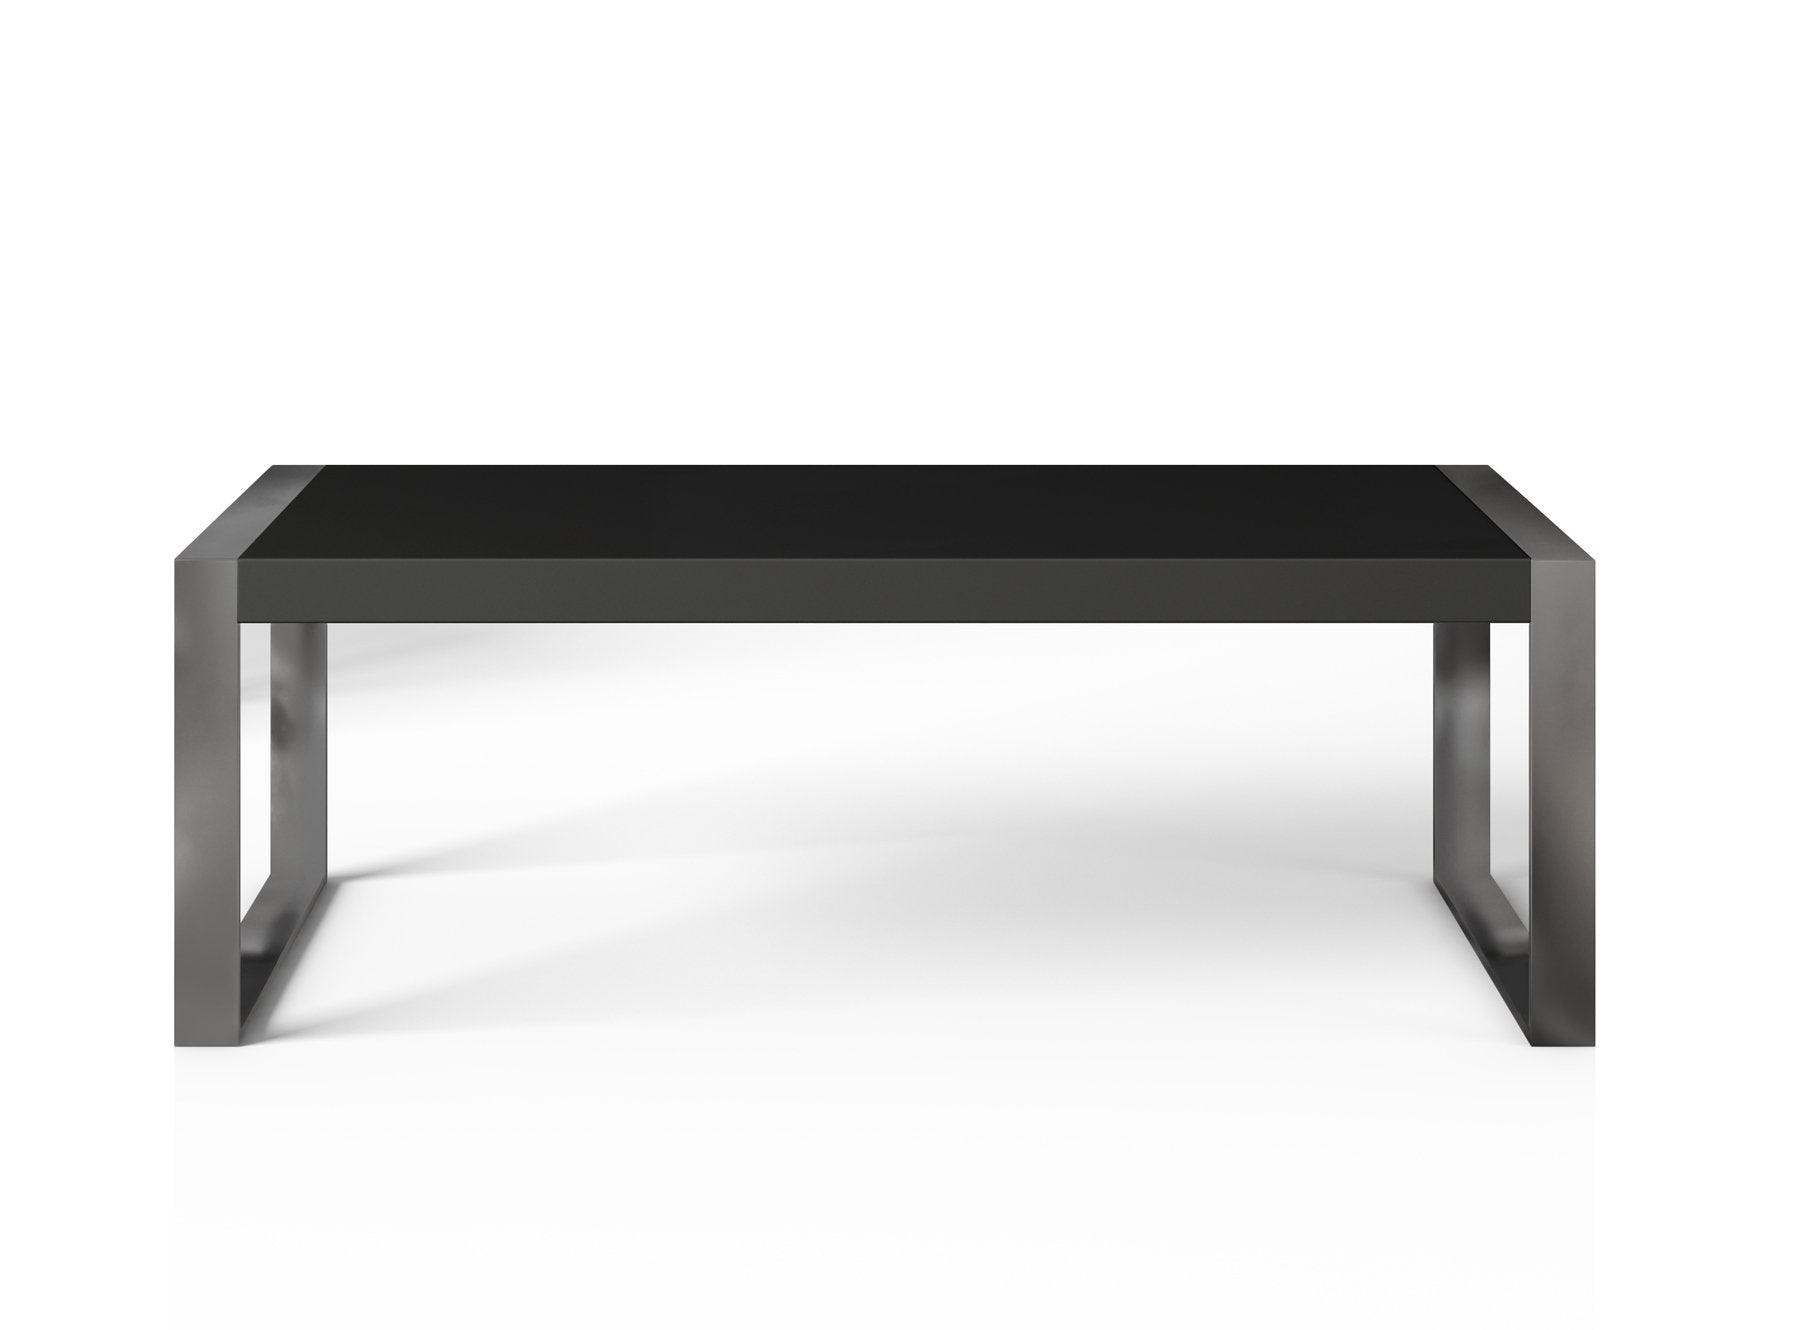 Academic Dining Table Black